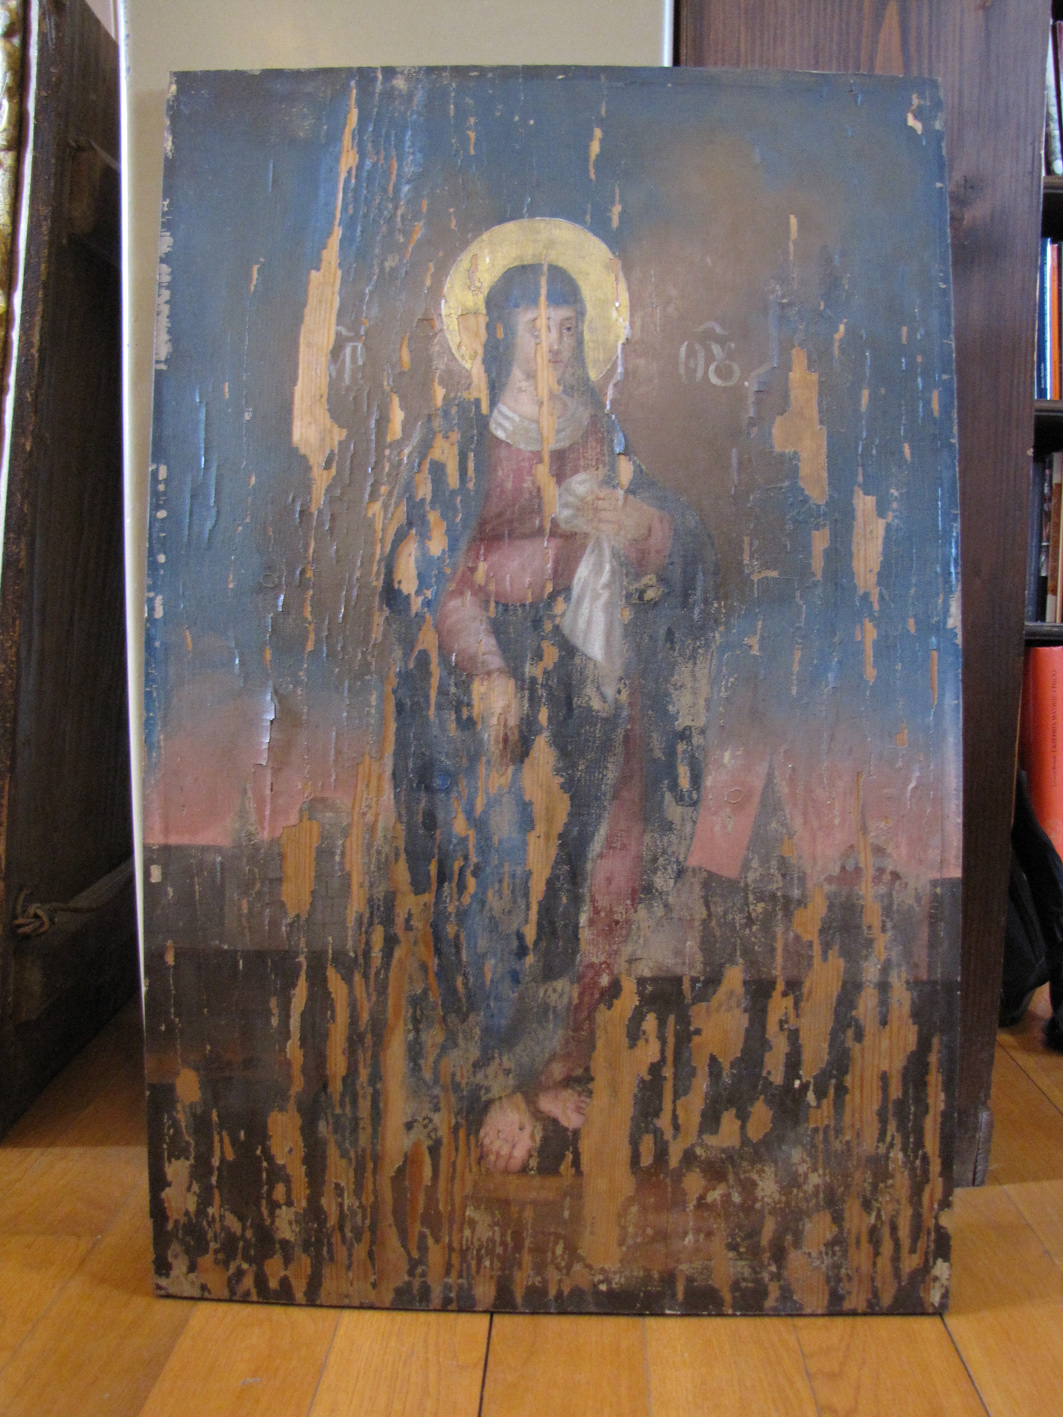 the painting is a part of a serb parochial furniture